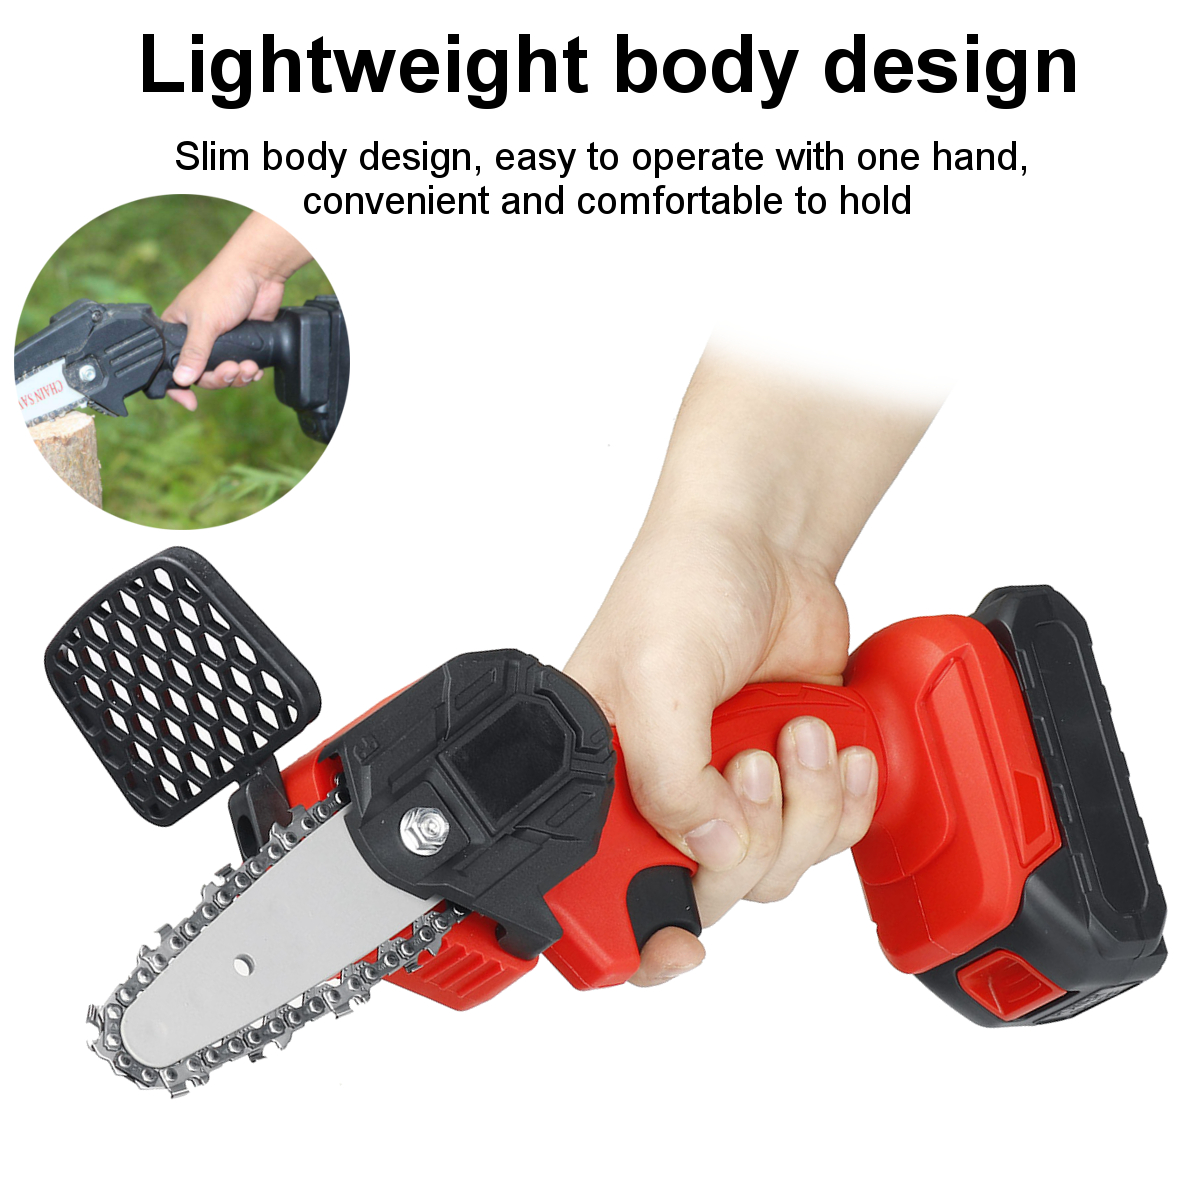 4-Inch-Portable-Cordless-Electric-Chain-Saw-Wood-3000rmin-Tree-ChainSaws-Wood-Cutting-Tool-W-1-or-2--1770254-5